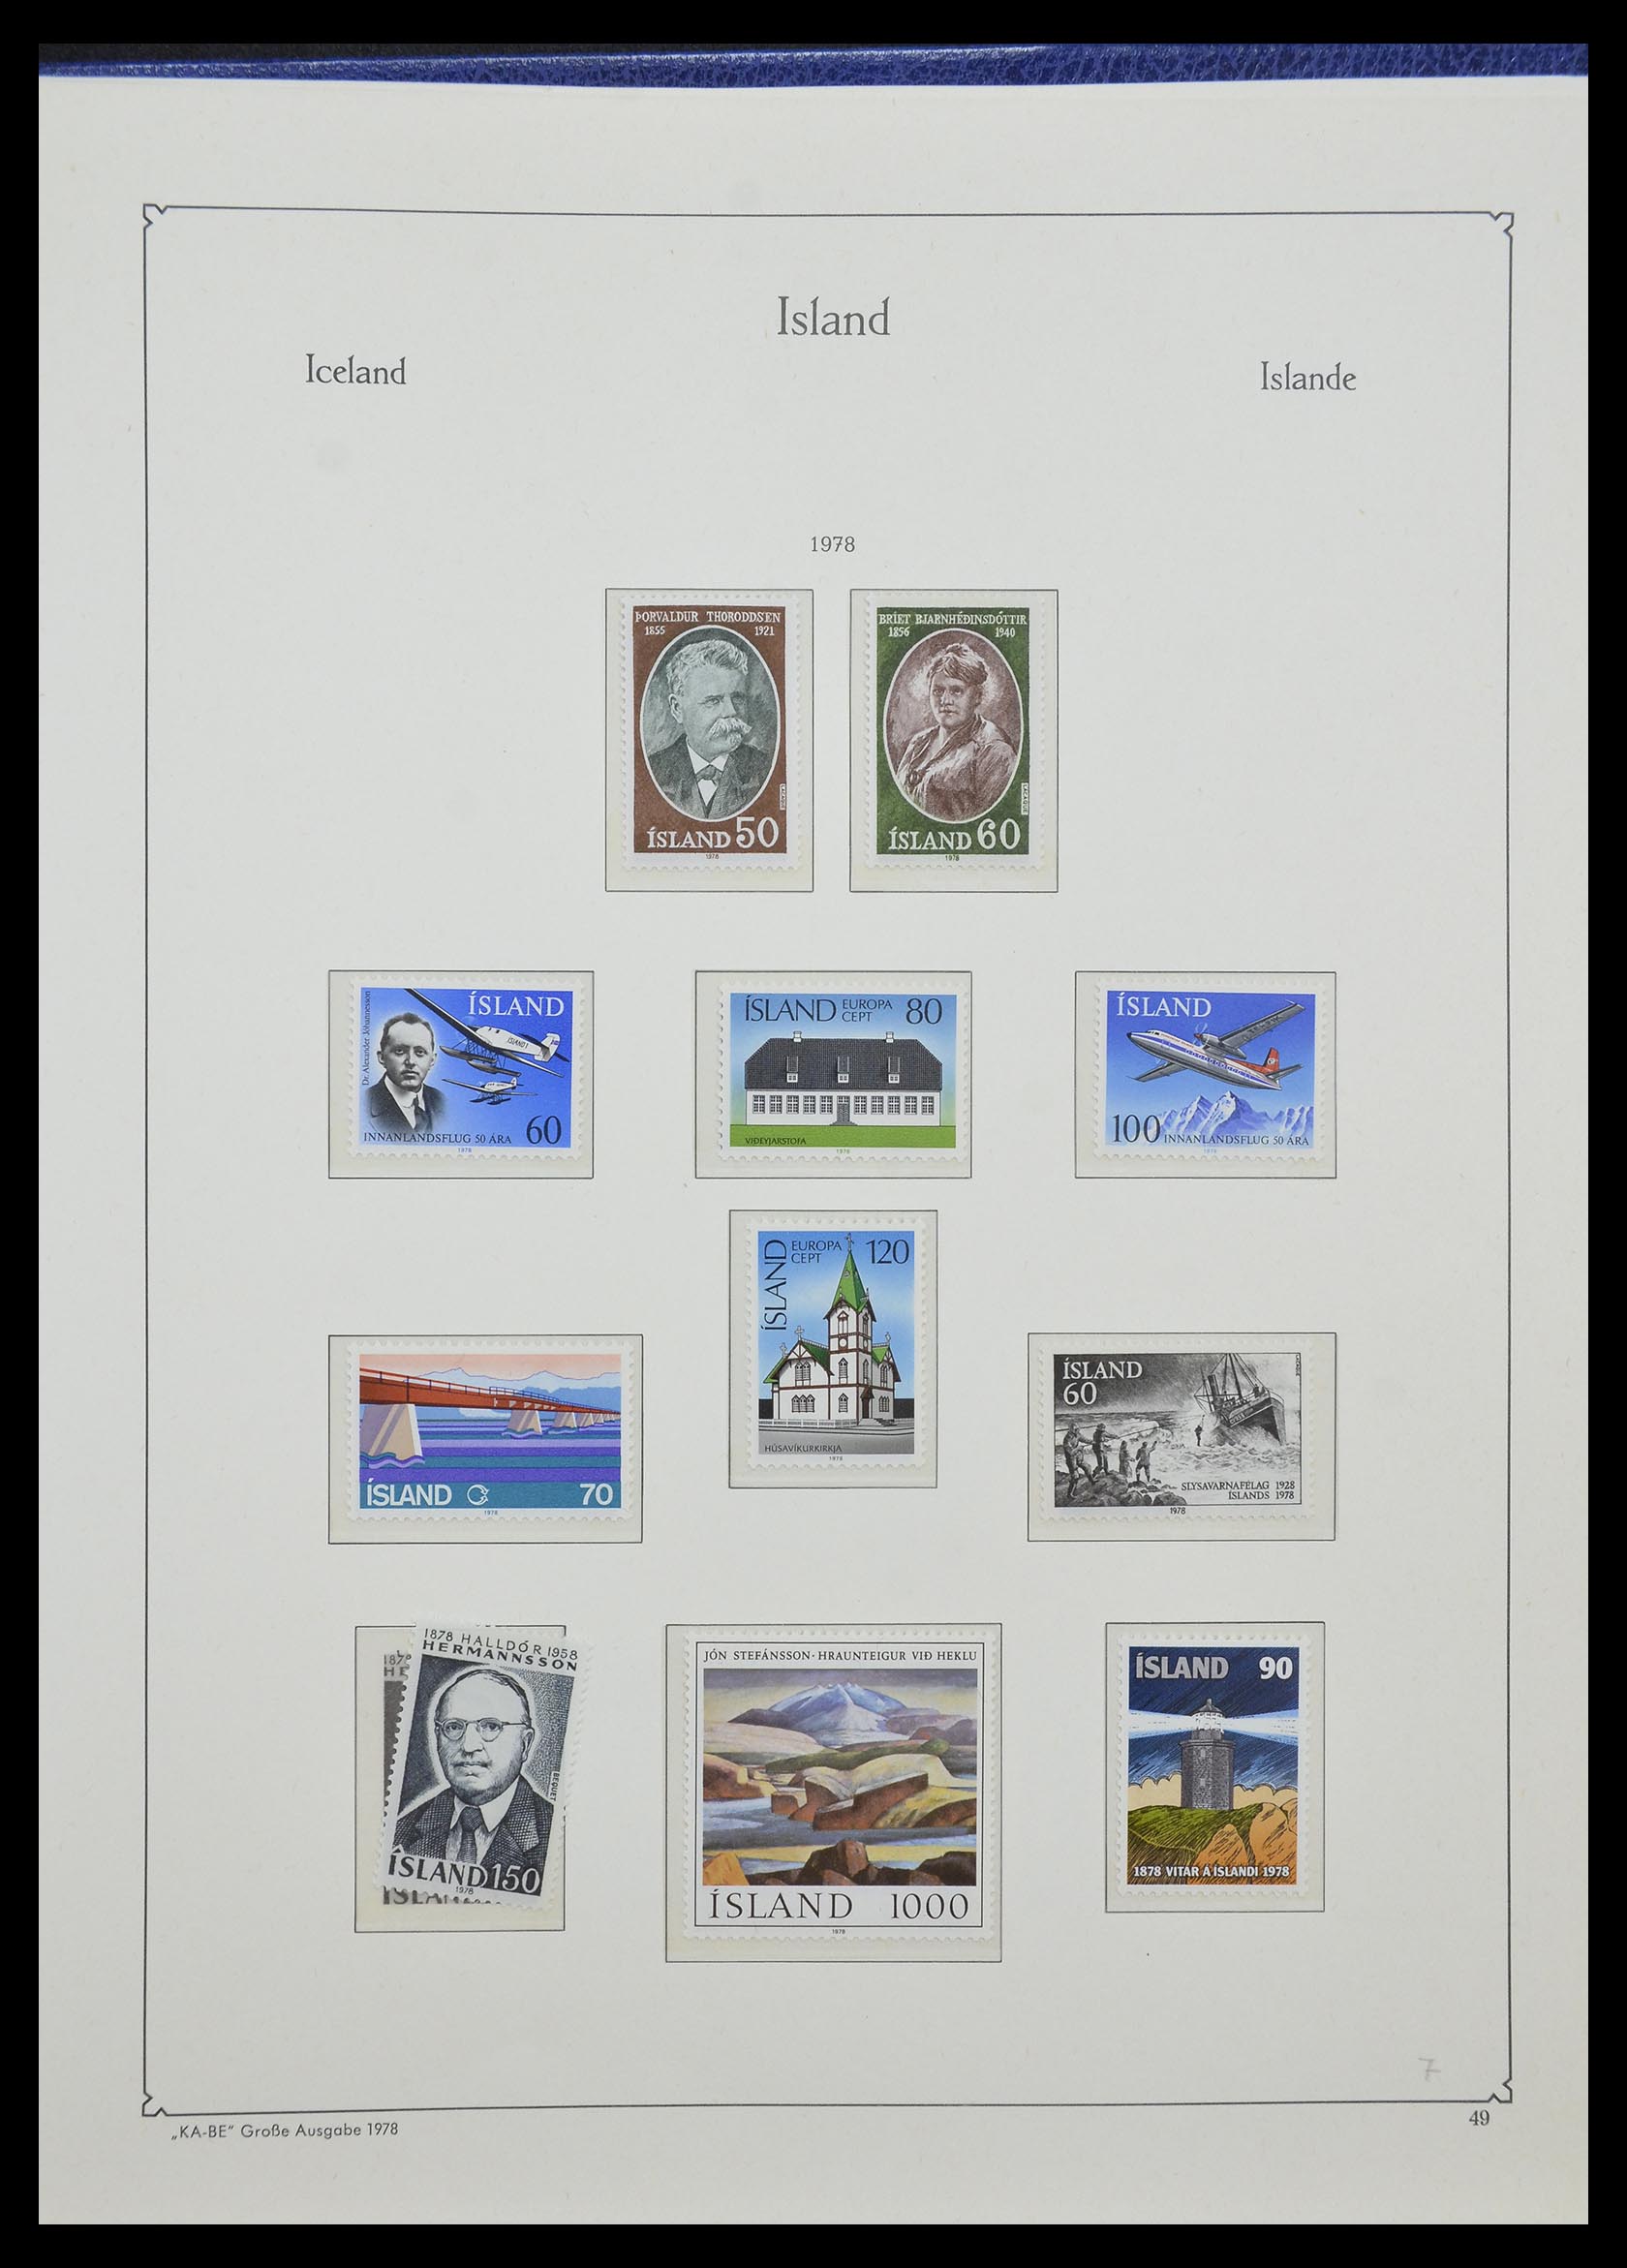 33185 032 - Stamp collection 33185 Iceland 1882-1989.